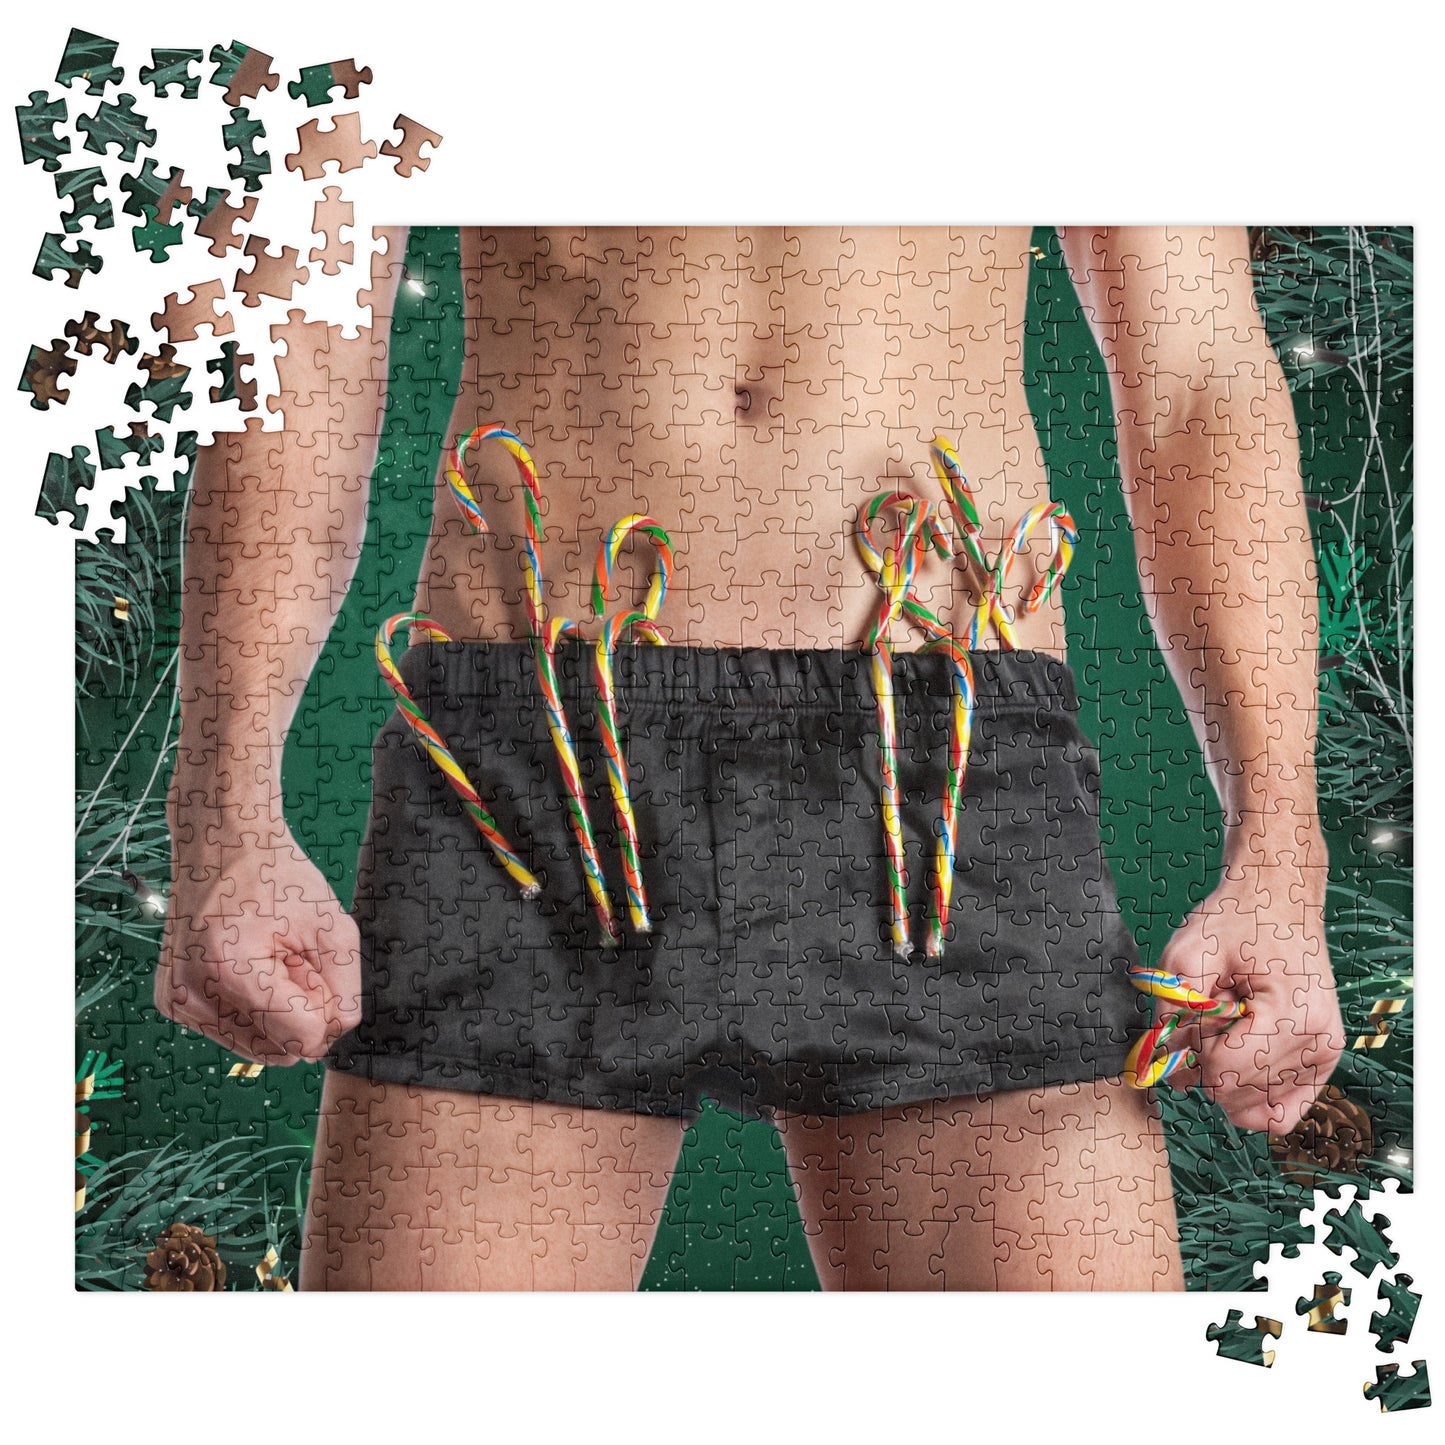 Sensual Jigsaw Puzzle: Man with Candy Canes